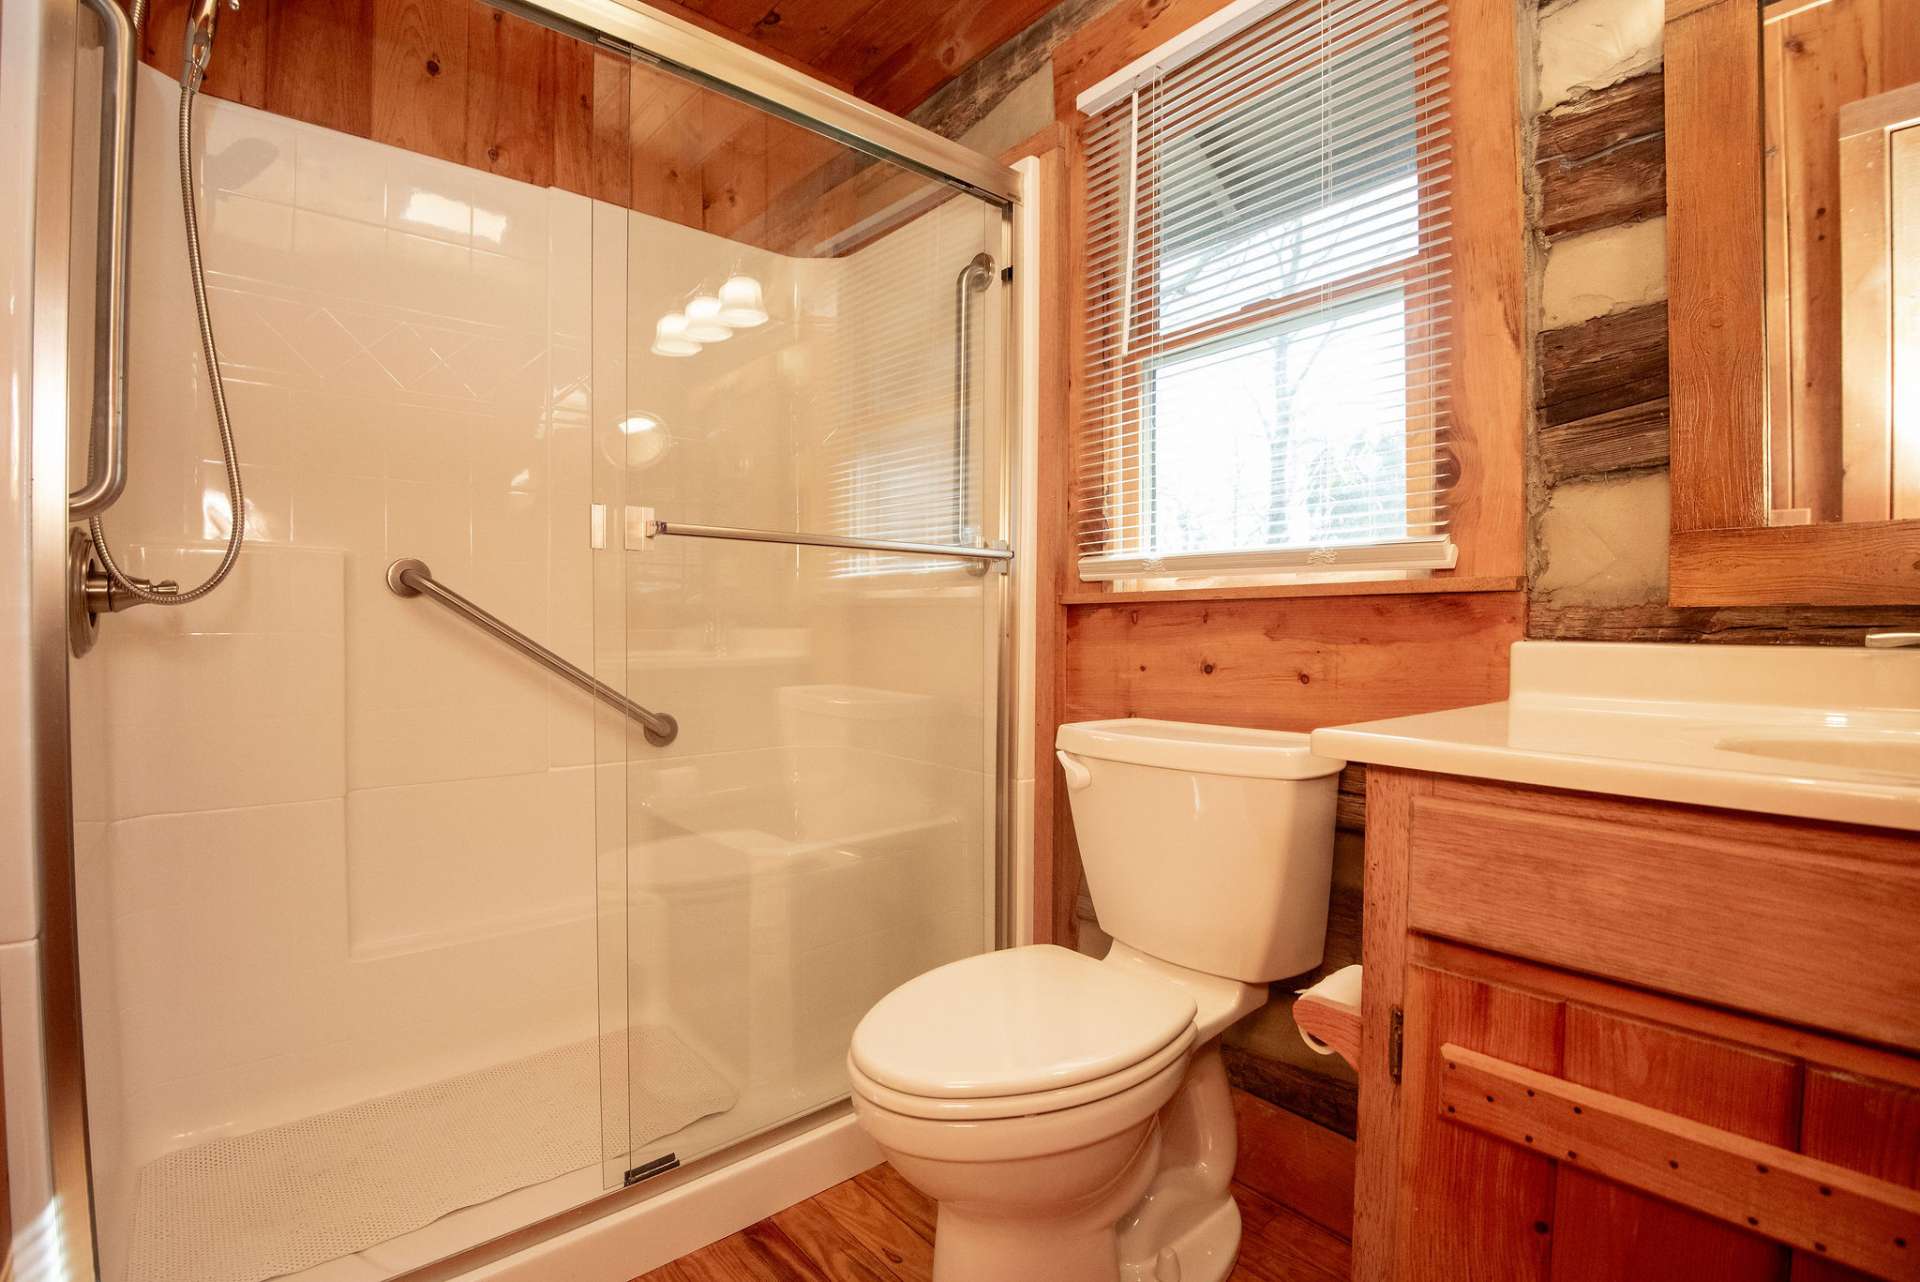 Primary full bath with easy walk-in shower.